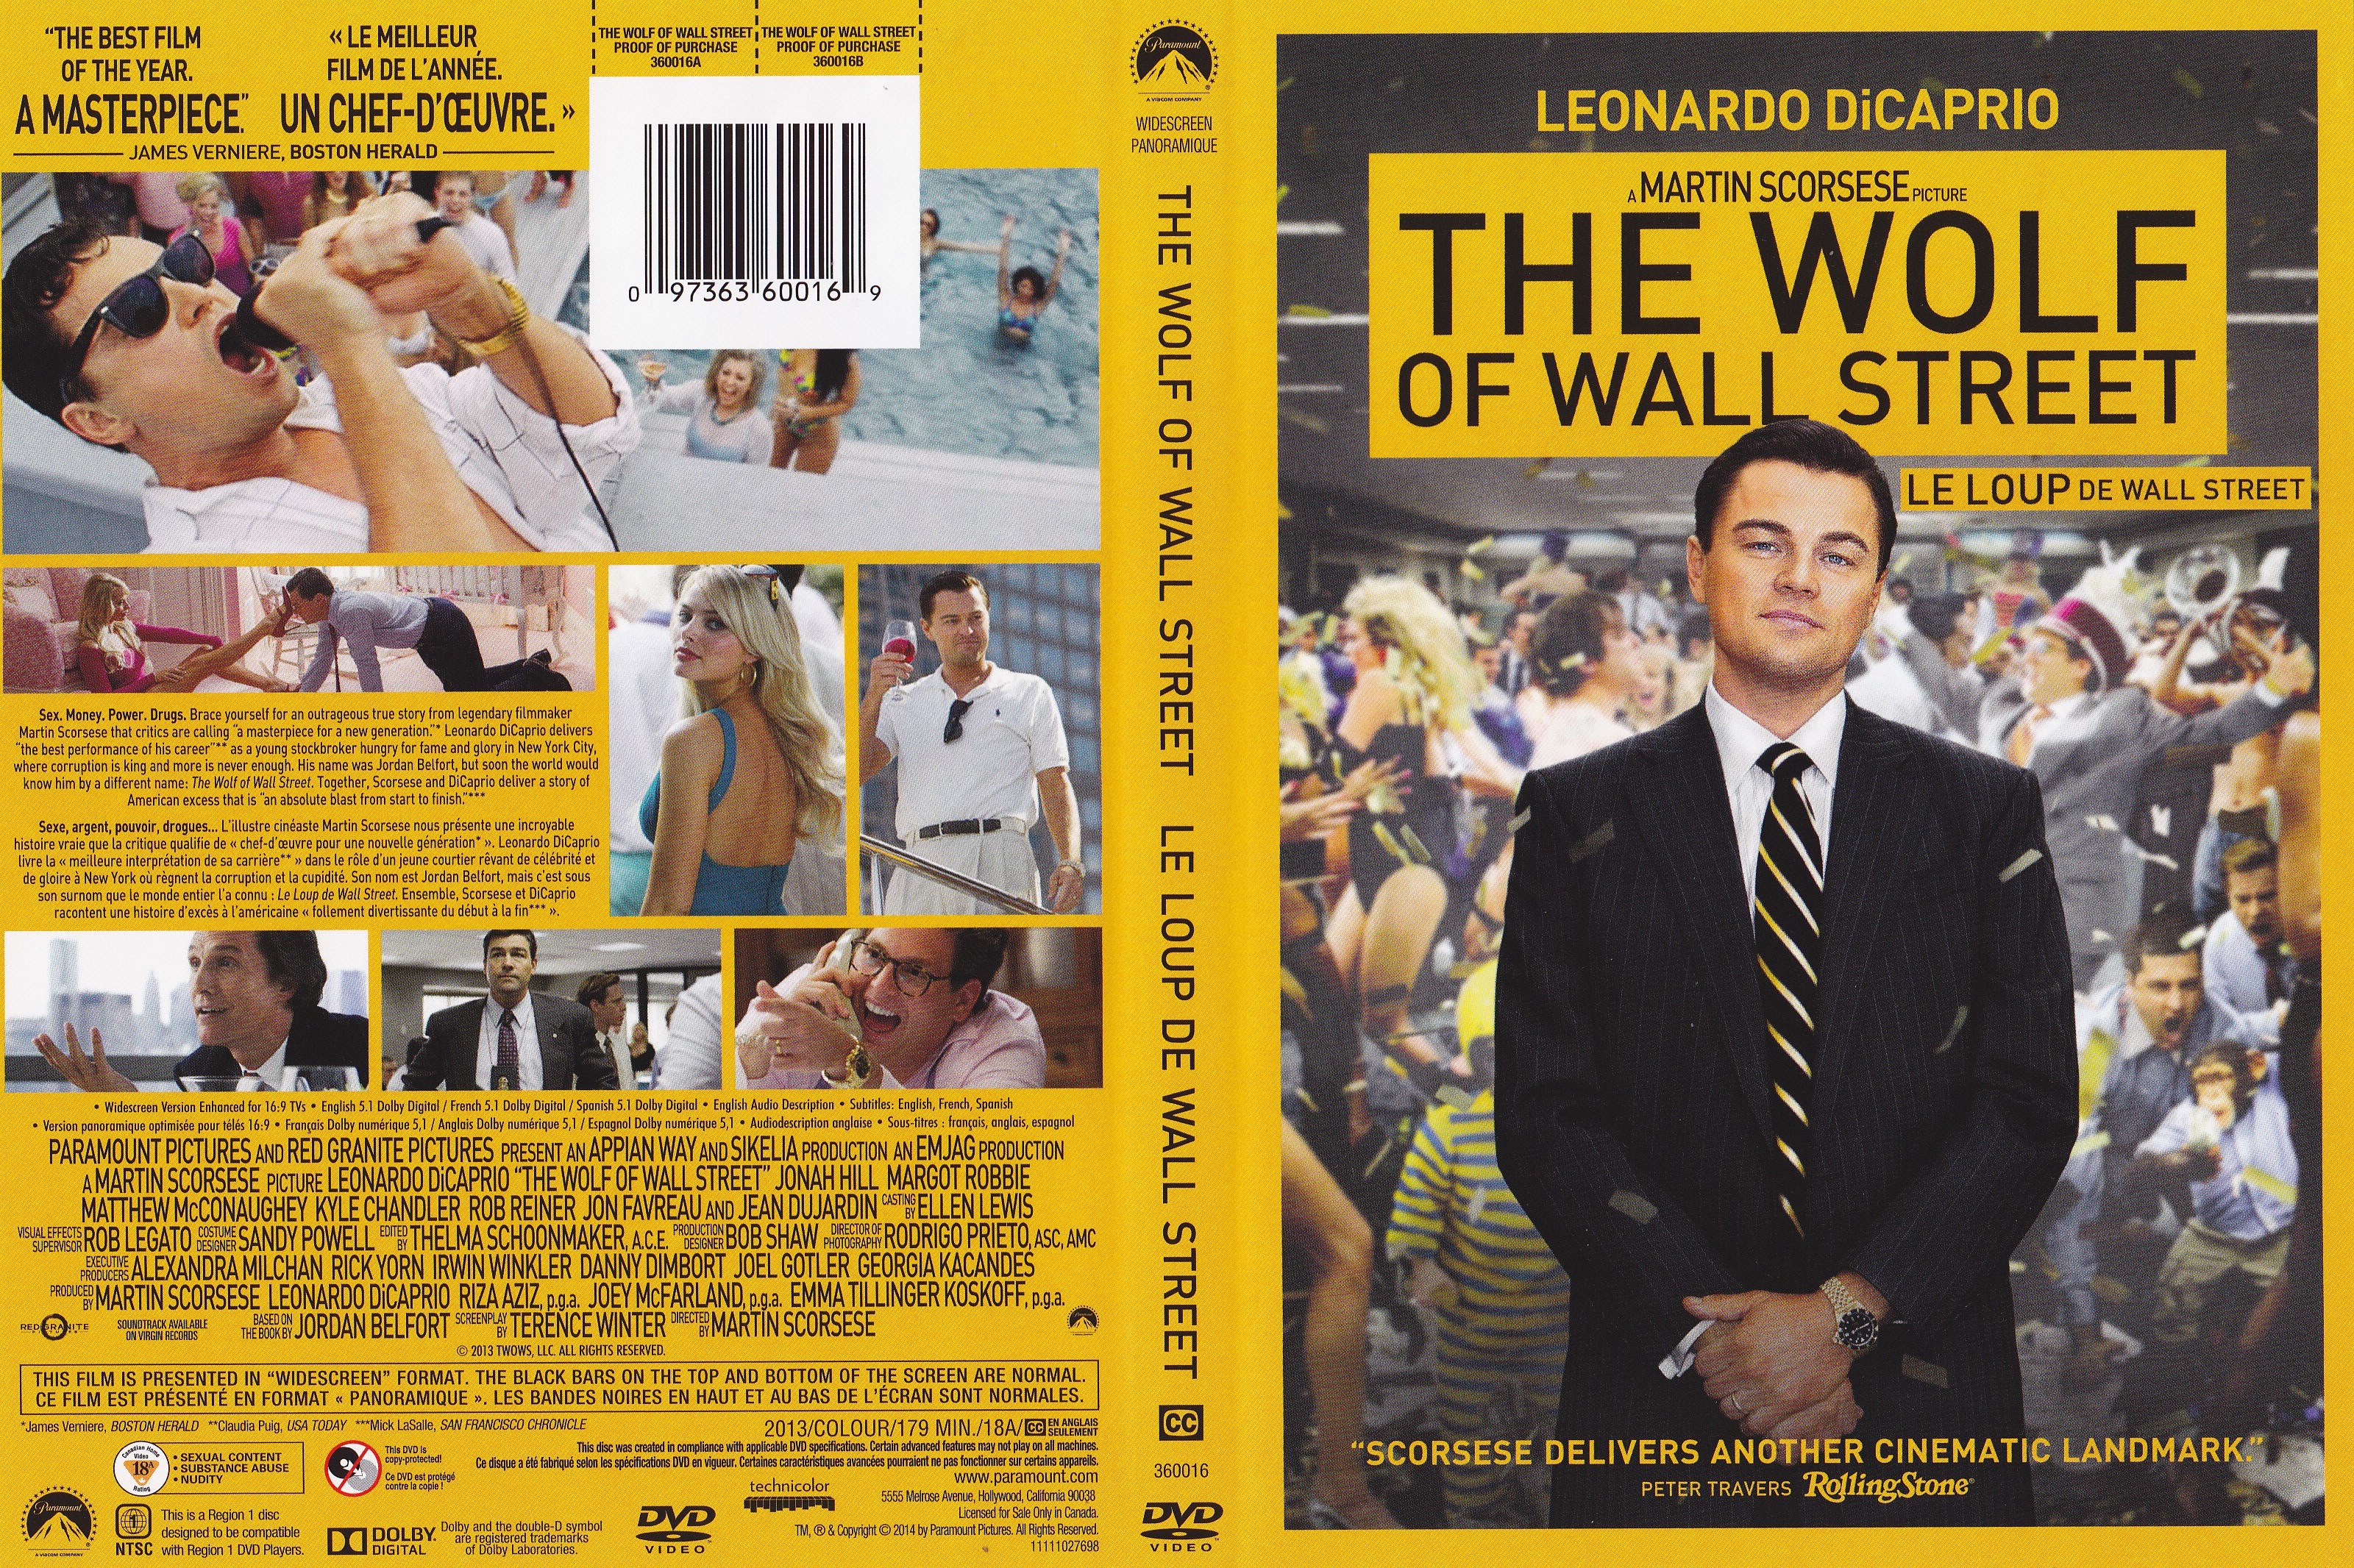 Jaquette DVD The wolf of wall street - Le loup de wall street (Canadienne)